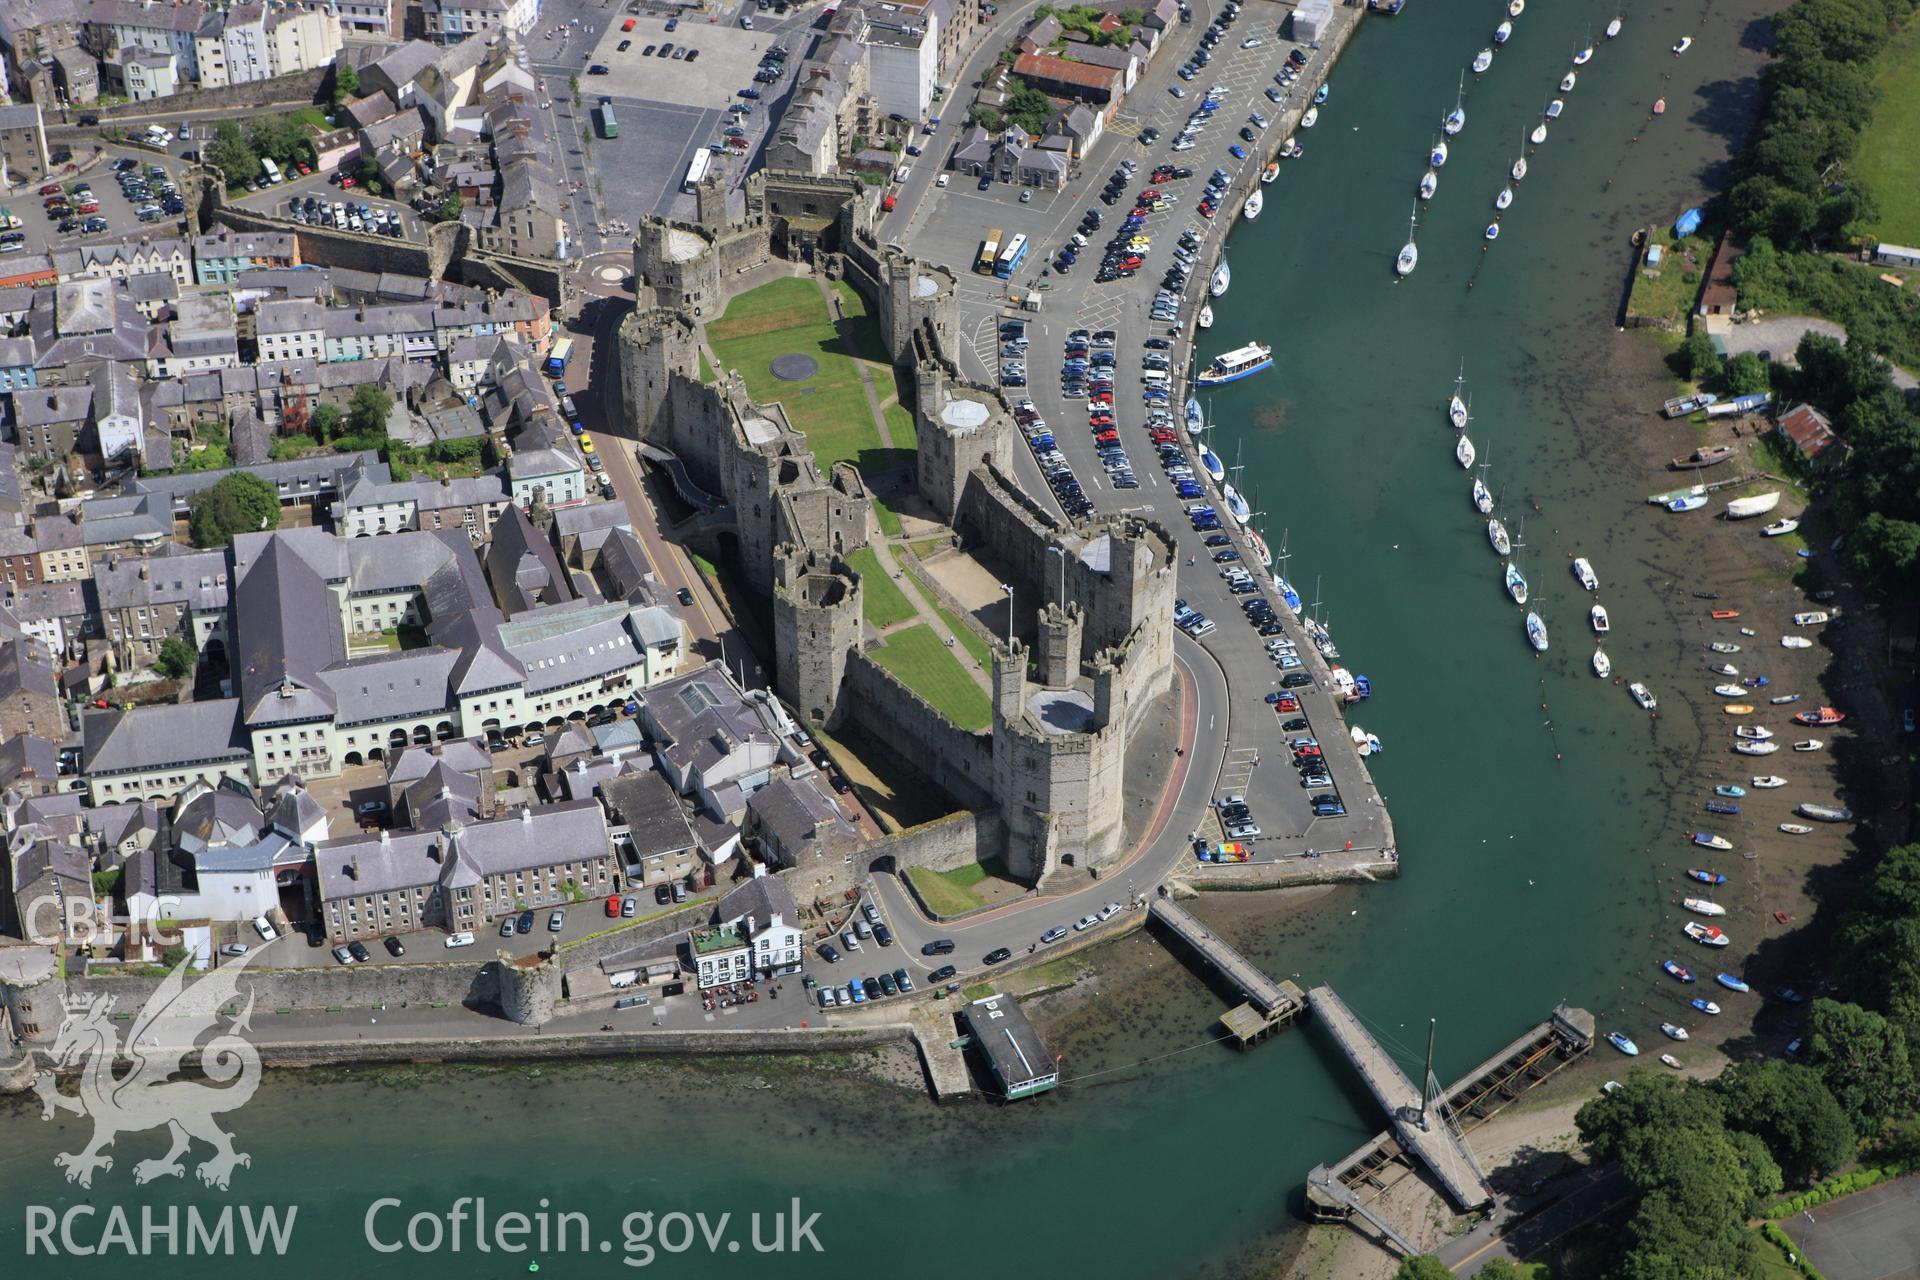 RCAHMW colour oblique aerial photograph of Caernarfon Castle and town. Taken on 16 June 2009 by Toby Driver